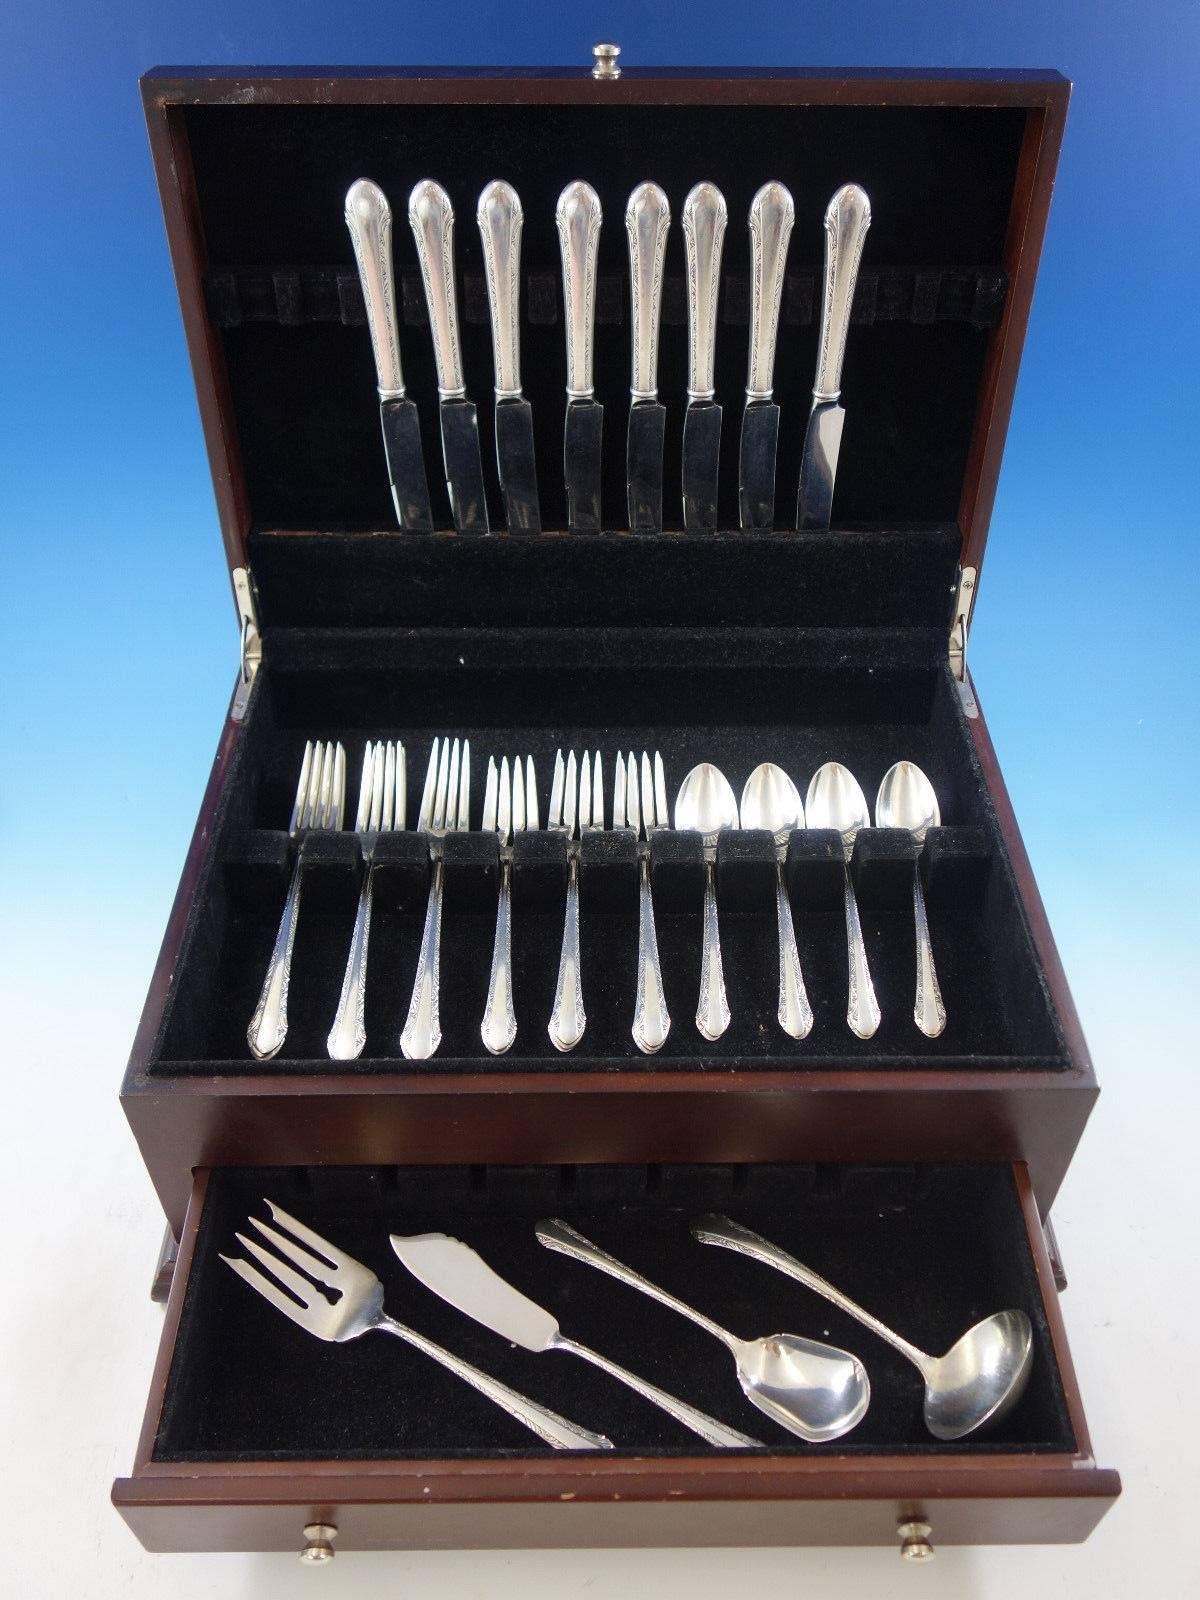 Chased Romantique by Alvin sterling silver flatware set, 36 pieces. This set includes: 

eight knives, 9